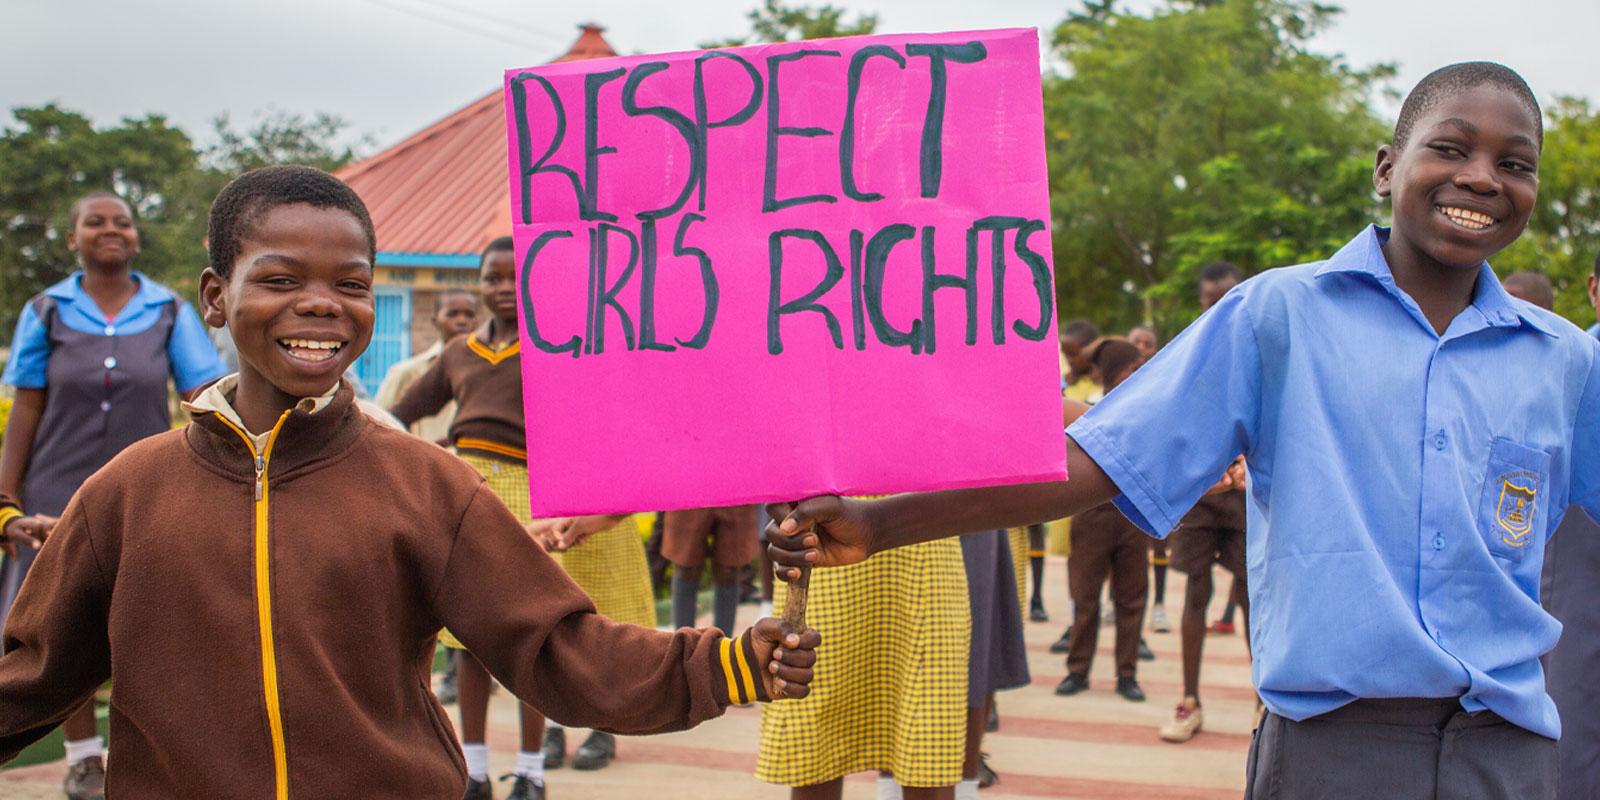 Boys holding sign: Respect girls rights